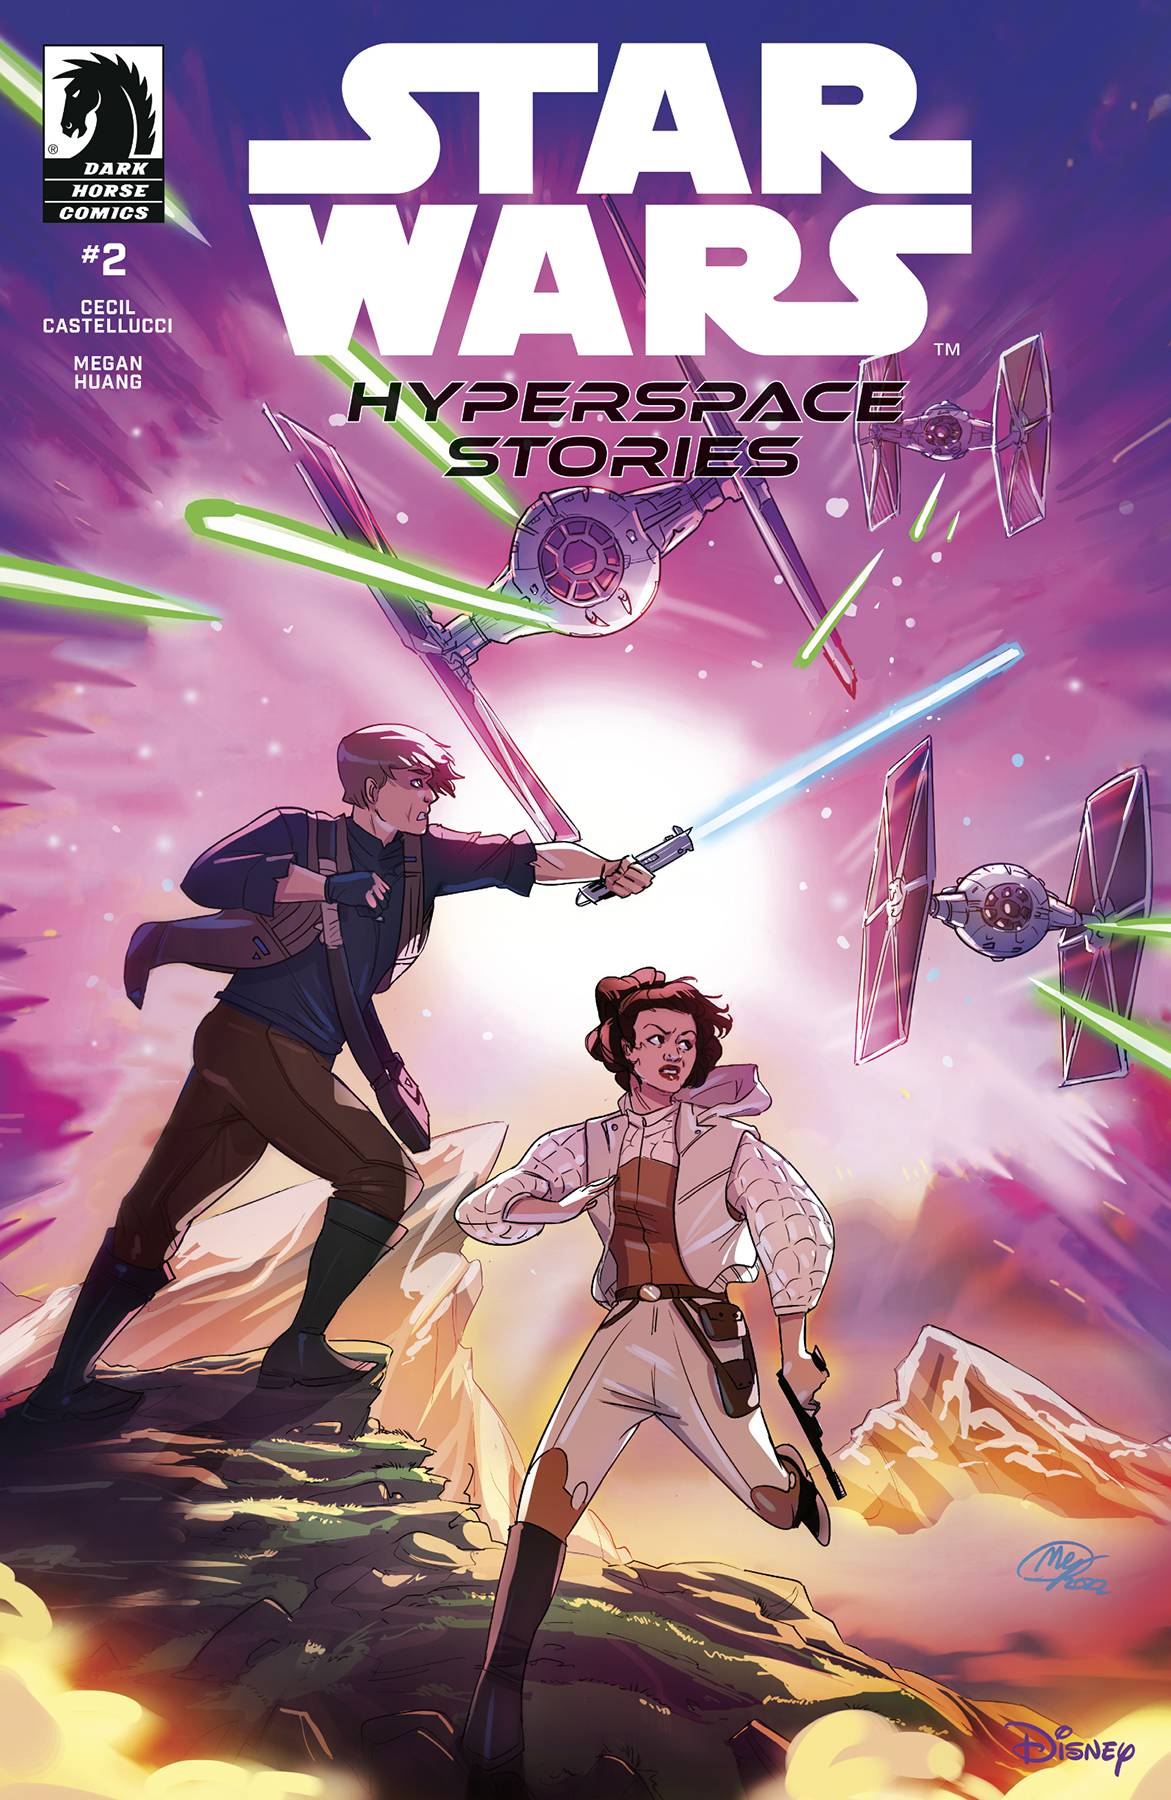 09/21/2022 STAR WARS HYPERSPACE STORIES #2 (OF 12) CVR A HUANG